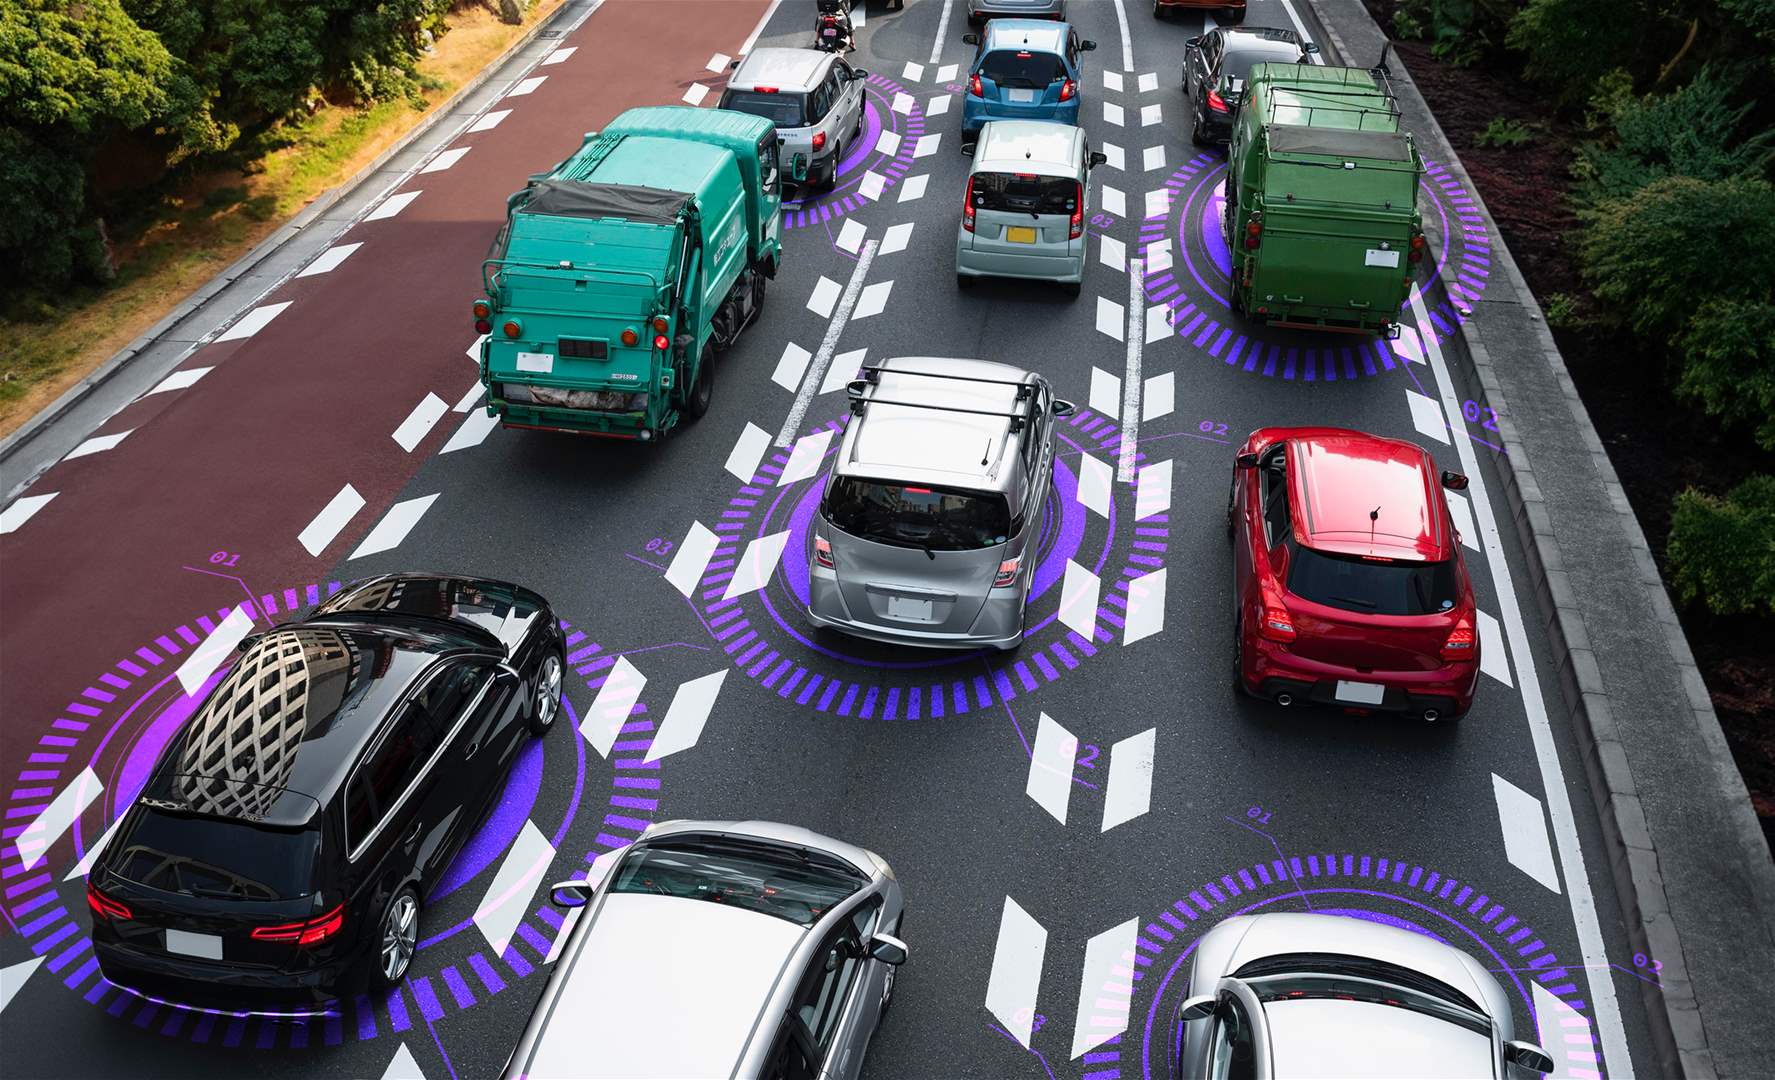 The automated vehicles and the path to self-driving cars